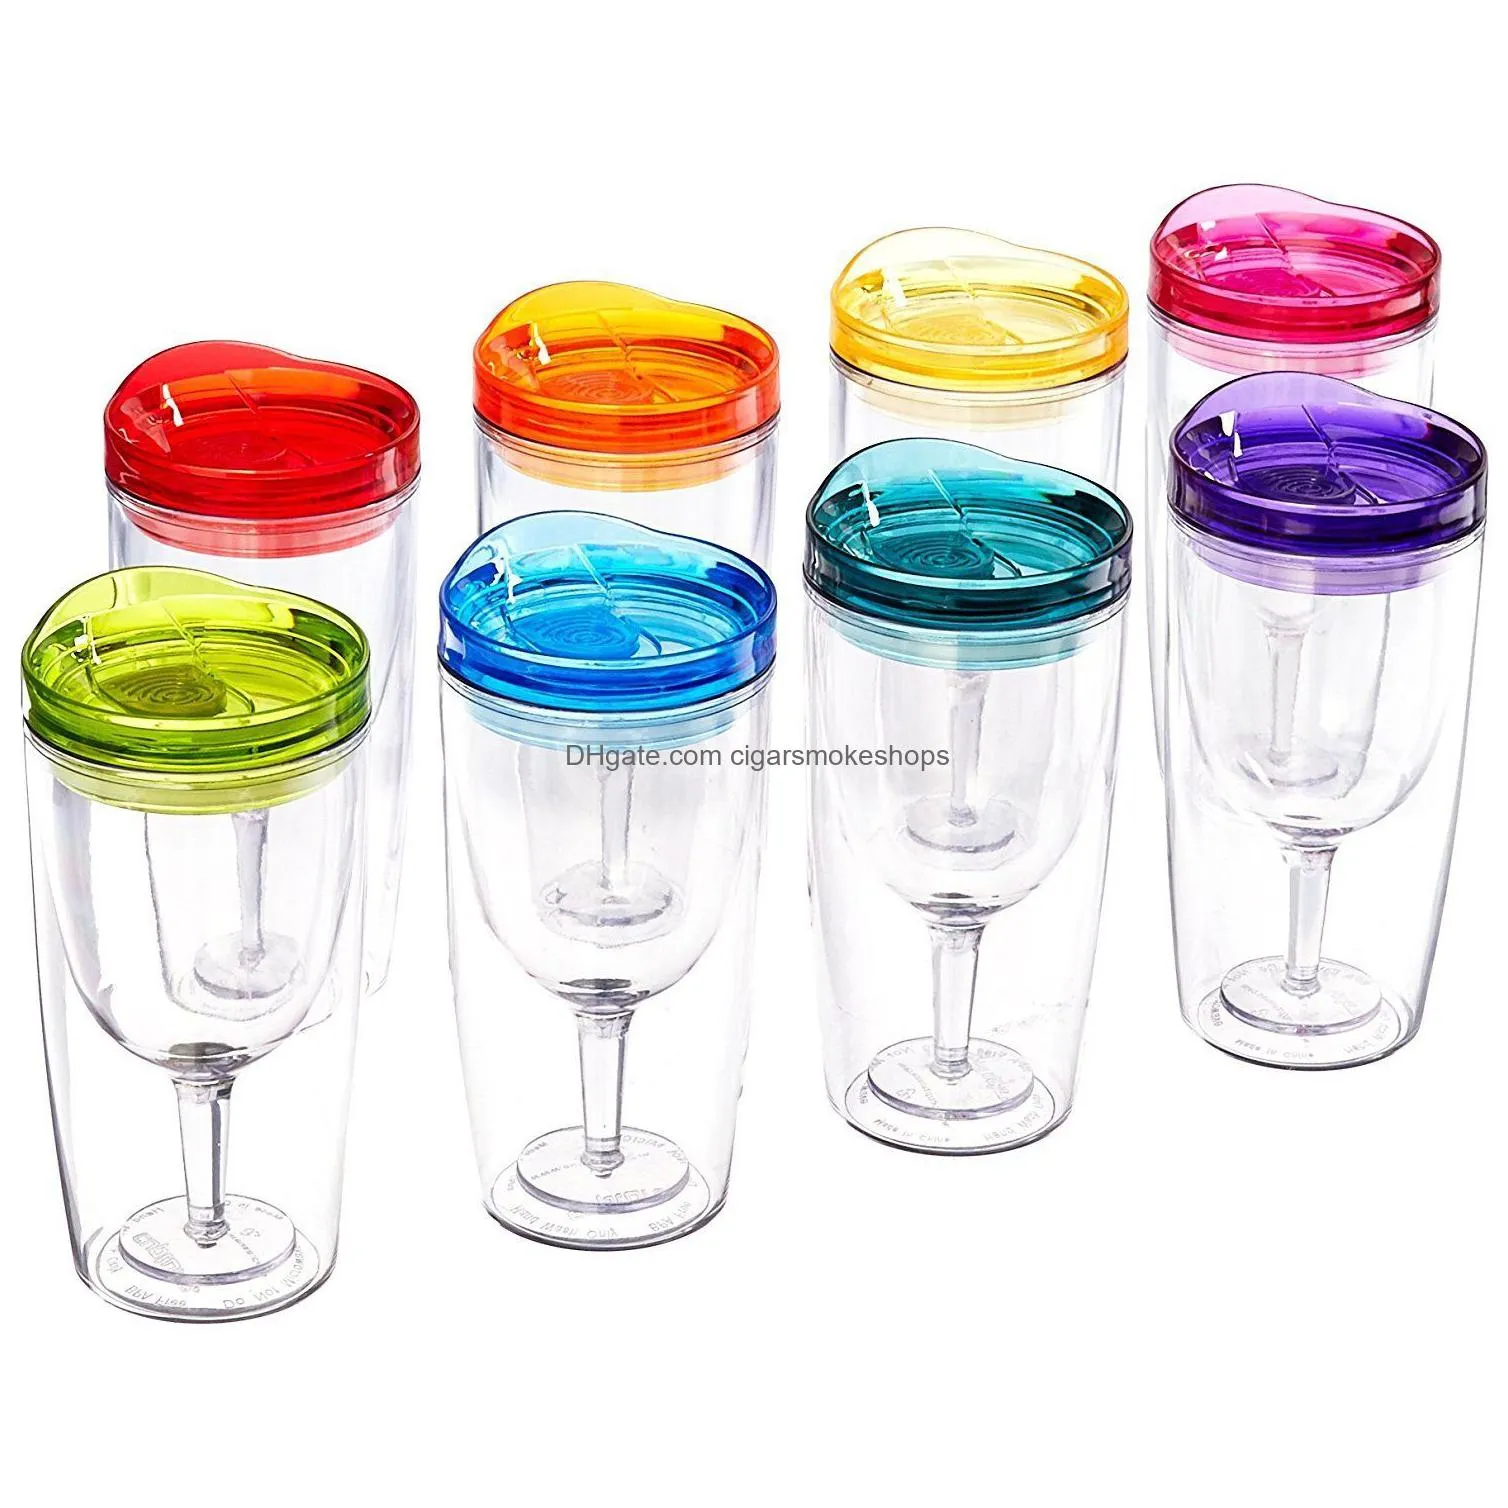 Wine Glasses A Color Insated Wine Tumbler Cup Champagne Cups 10Oz Stemless Plastic Glasses With Slid Lid Mti Home Garden Kitchen, Dini Dhrws